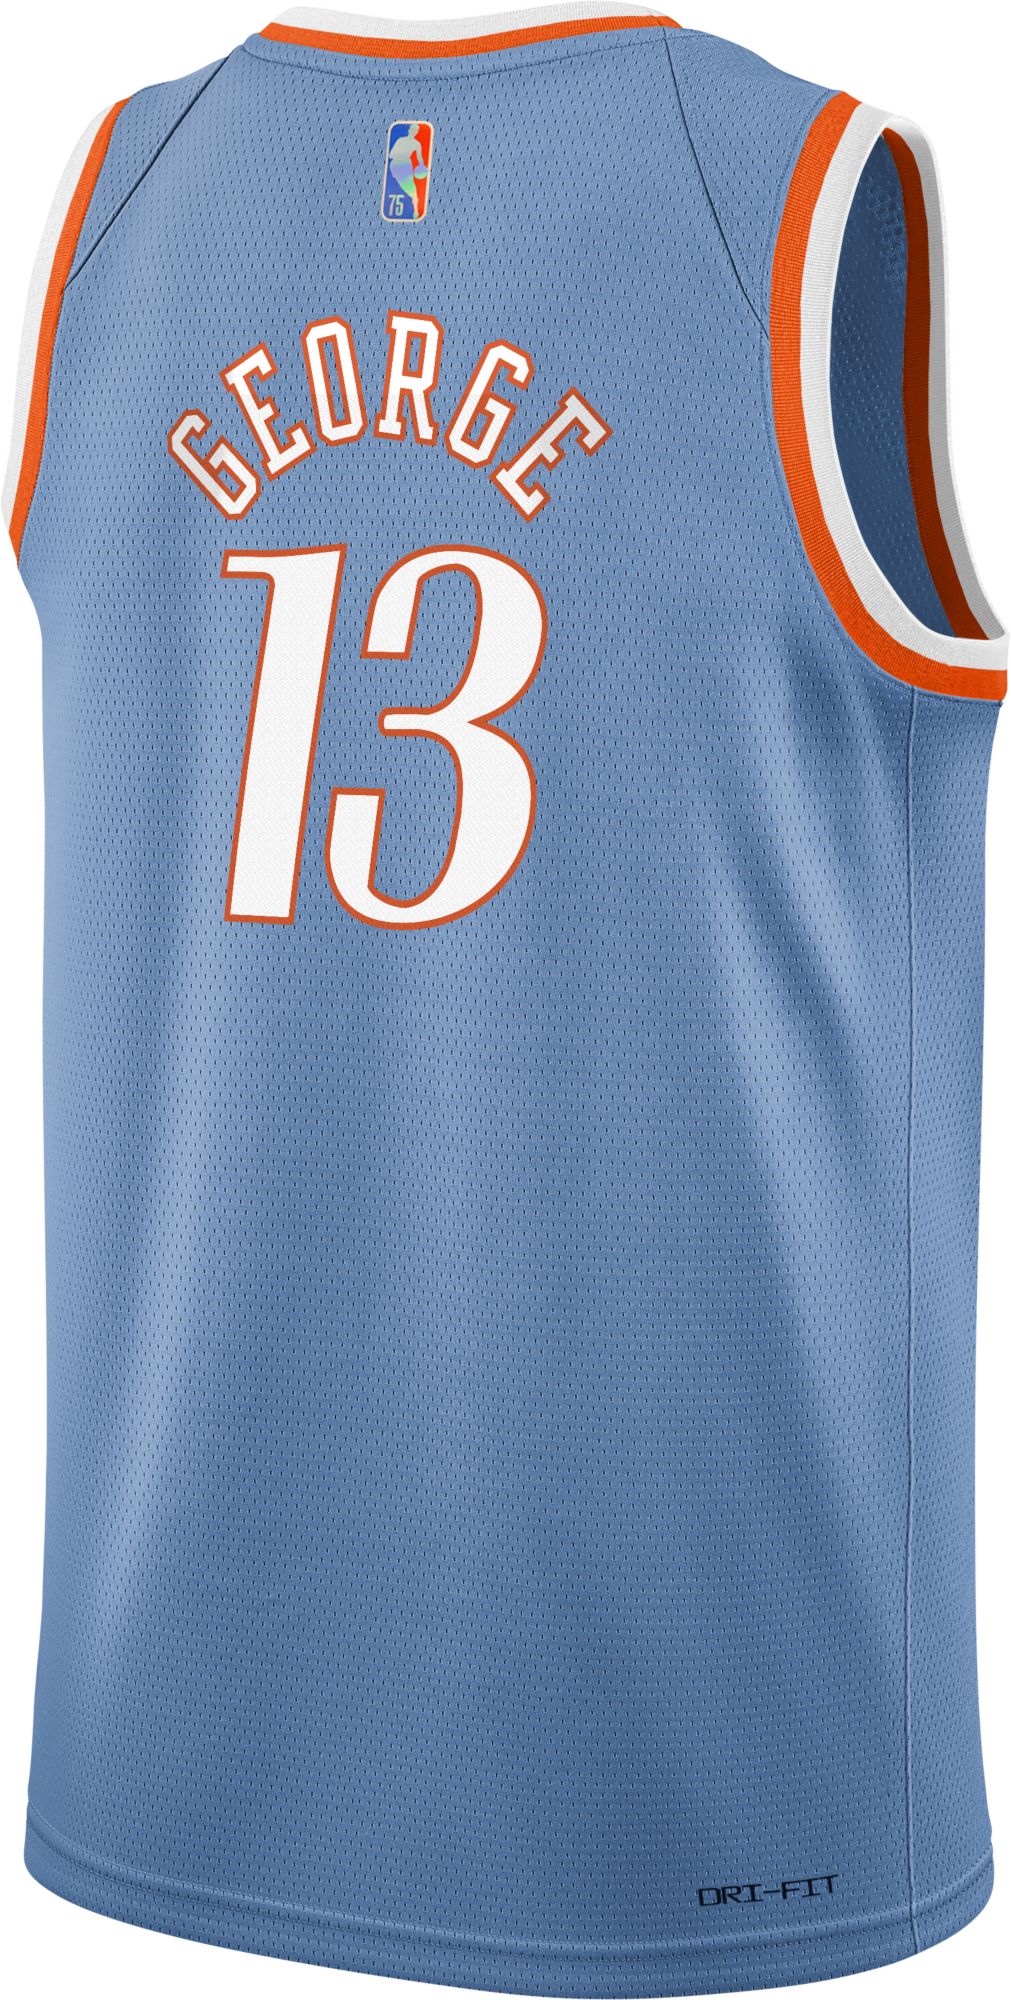 paul george jersey authentic